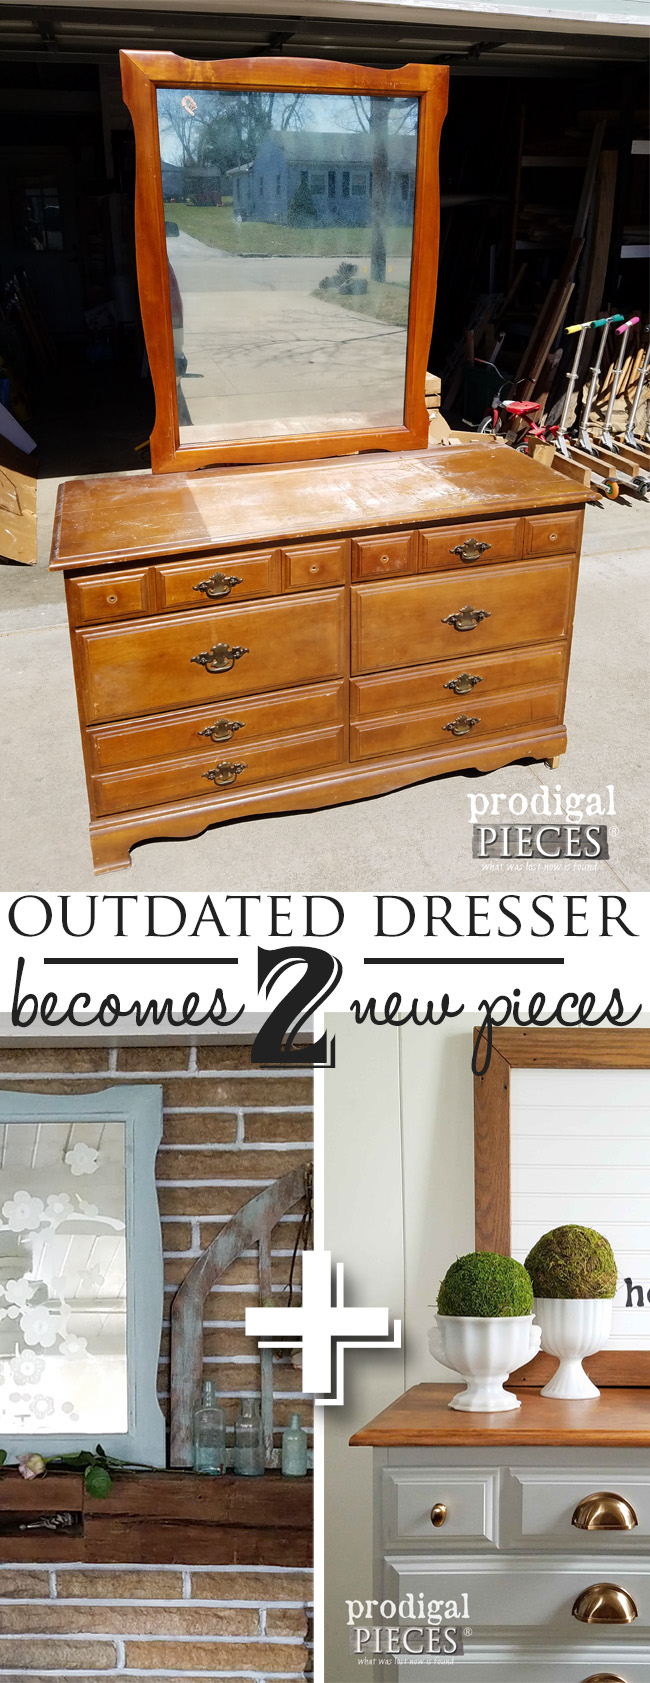 Outdated becomes 2 new projects with a bit of DIY style. See it here by Prodigal Pieces | prodigalpieces.com